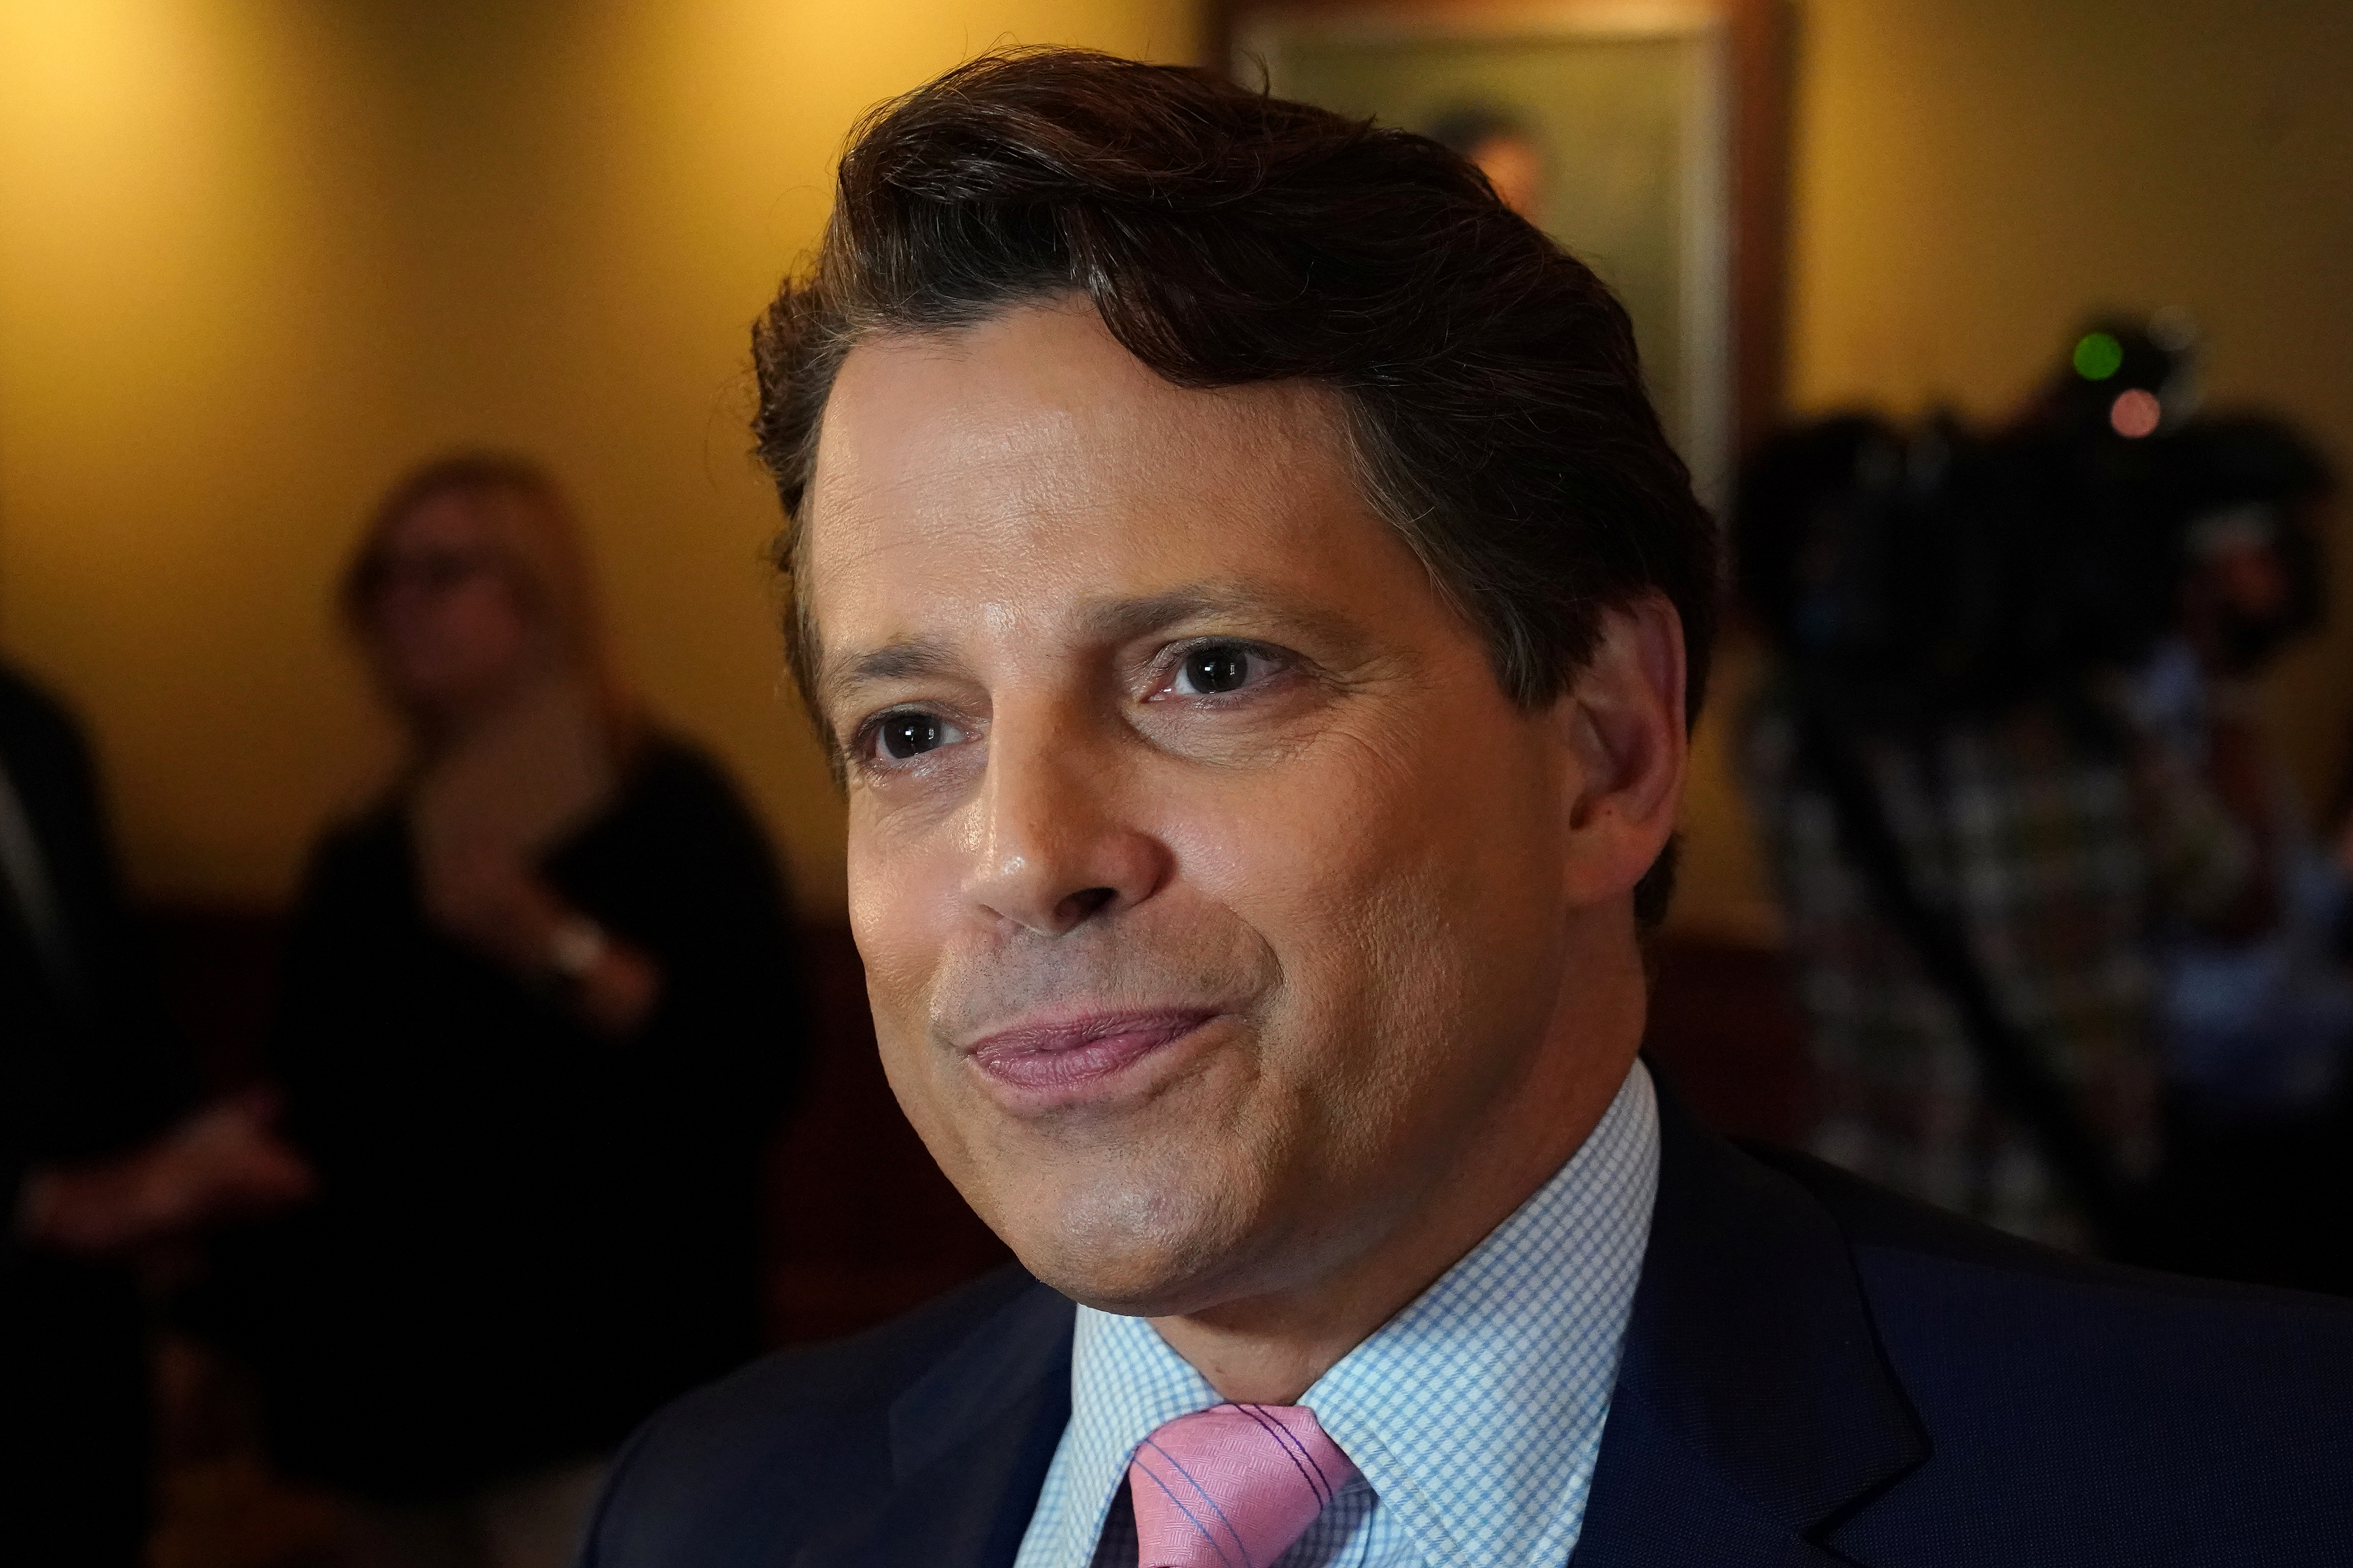 Former White House communications director Scaramucci is pictured following a preview for the off-Broadway show 'Trump Family Special' in New York City